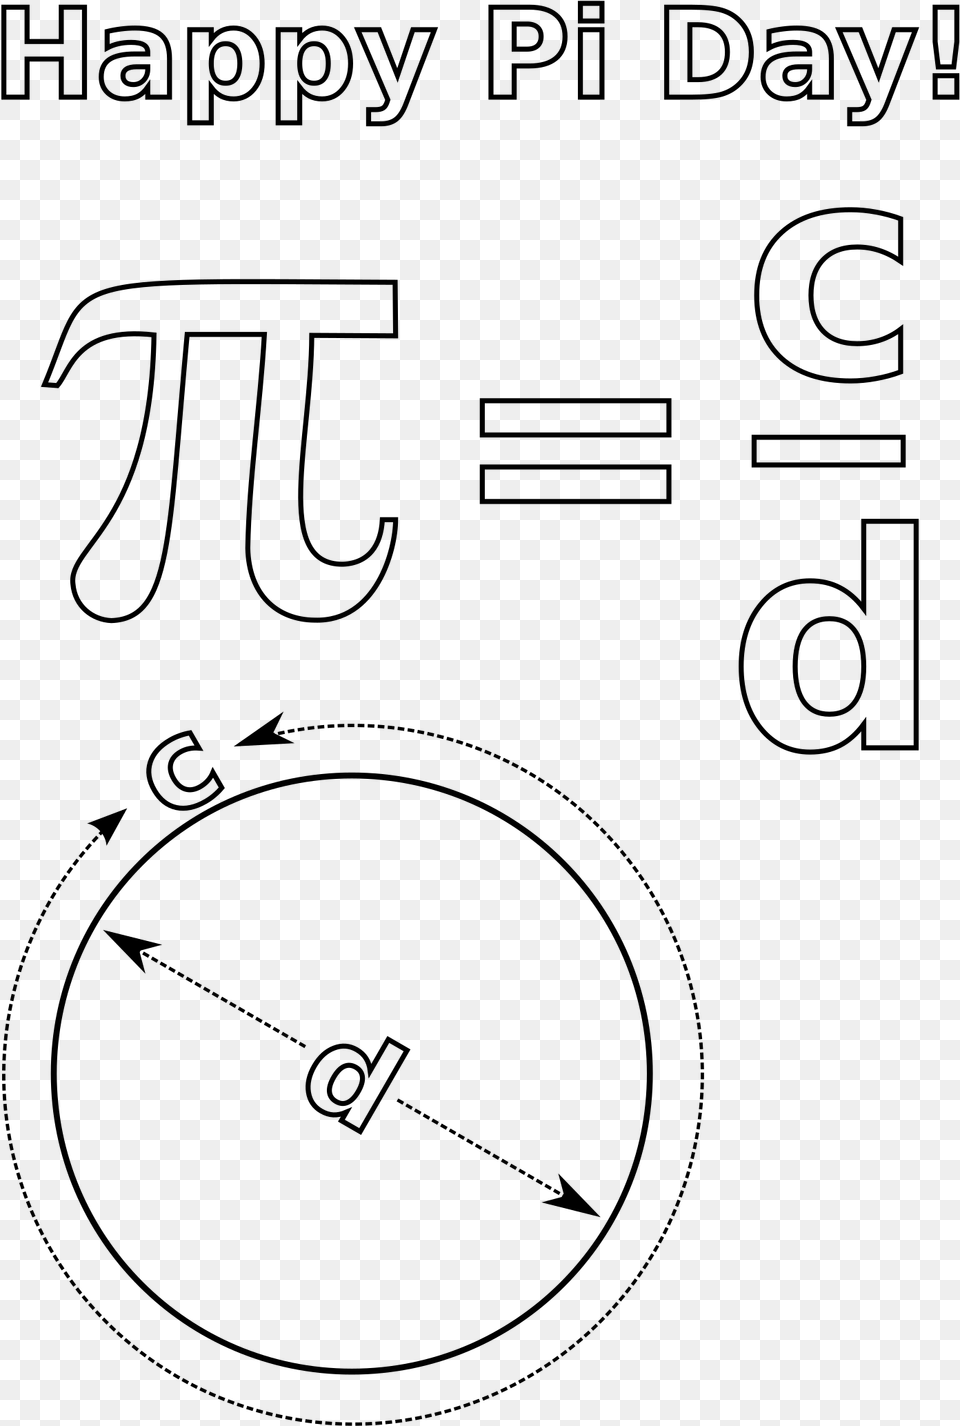 Pi Day Lesson On Circles And Math Clip Arts Pi Day 2019 Activities, Gray Free Png Download